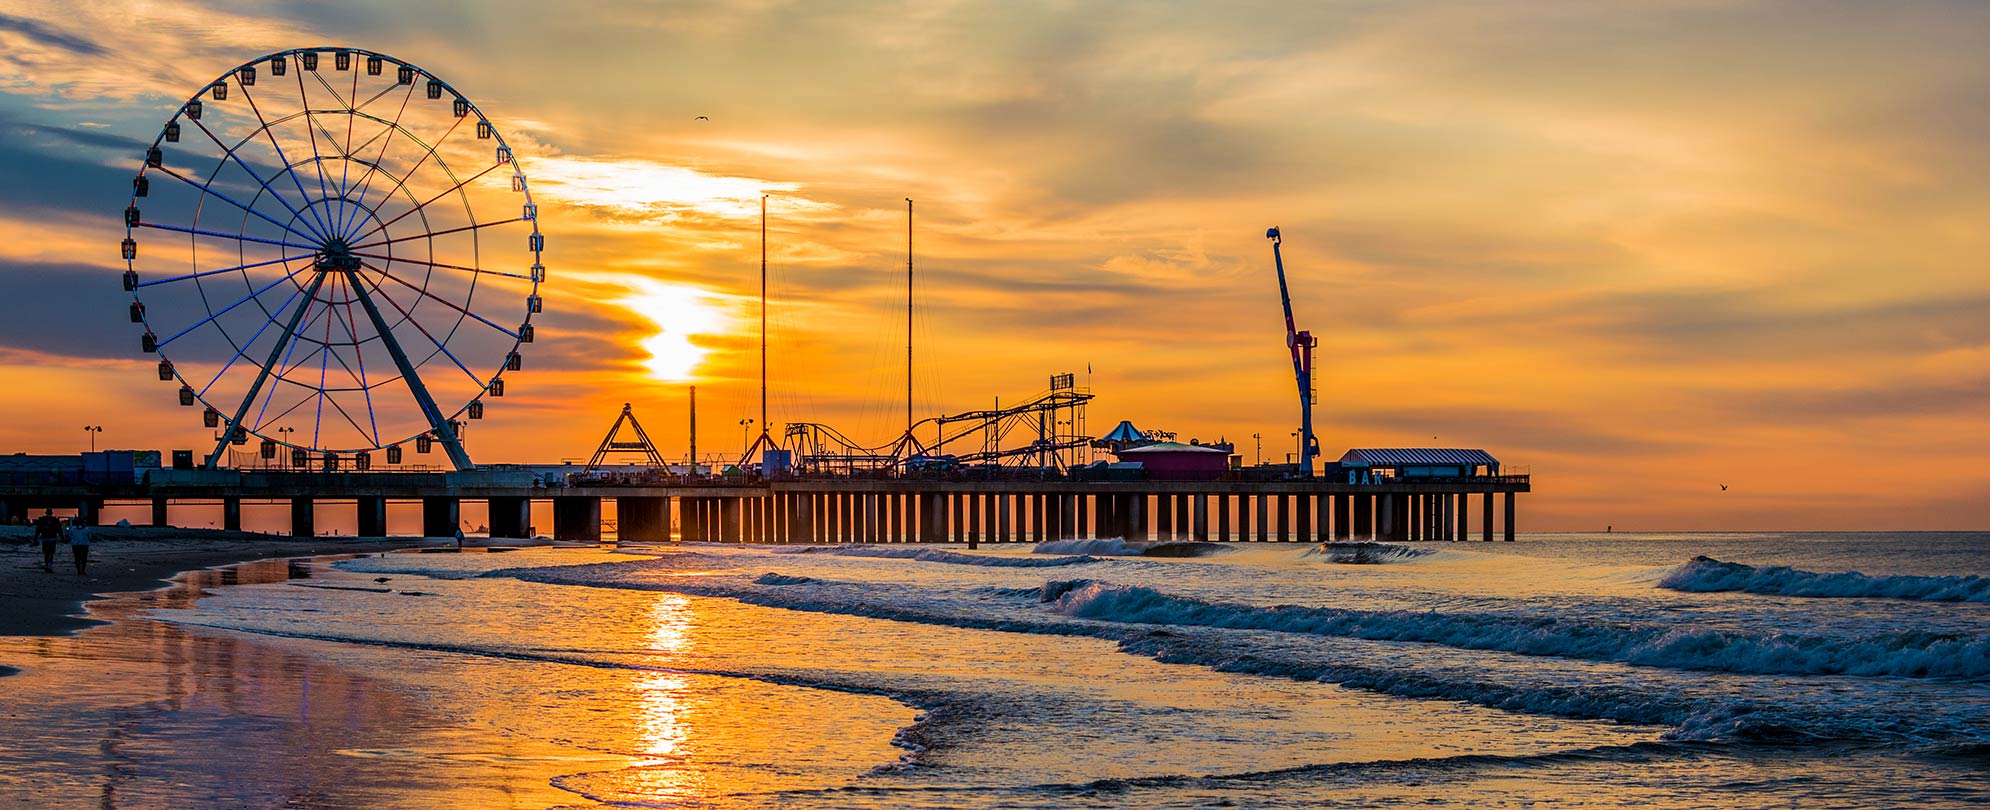 The Steel Pier at sunset in Atlantic City, New Jersey.